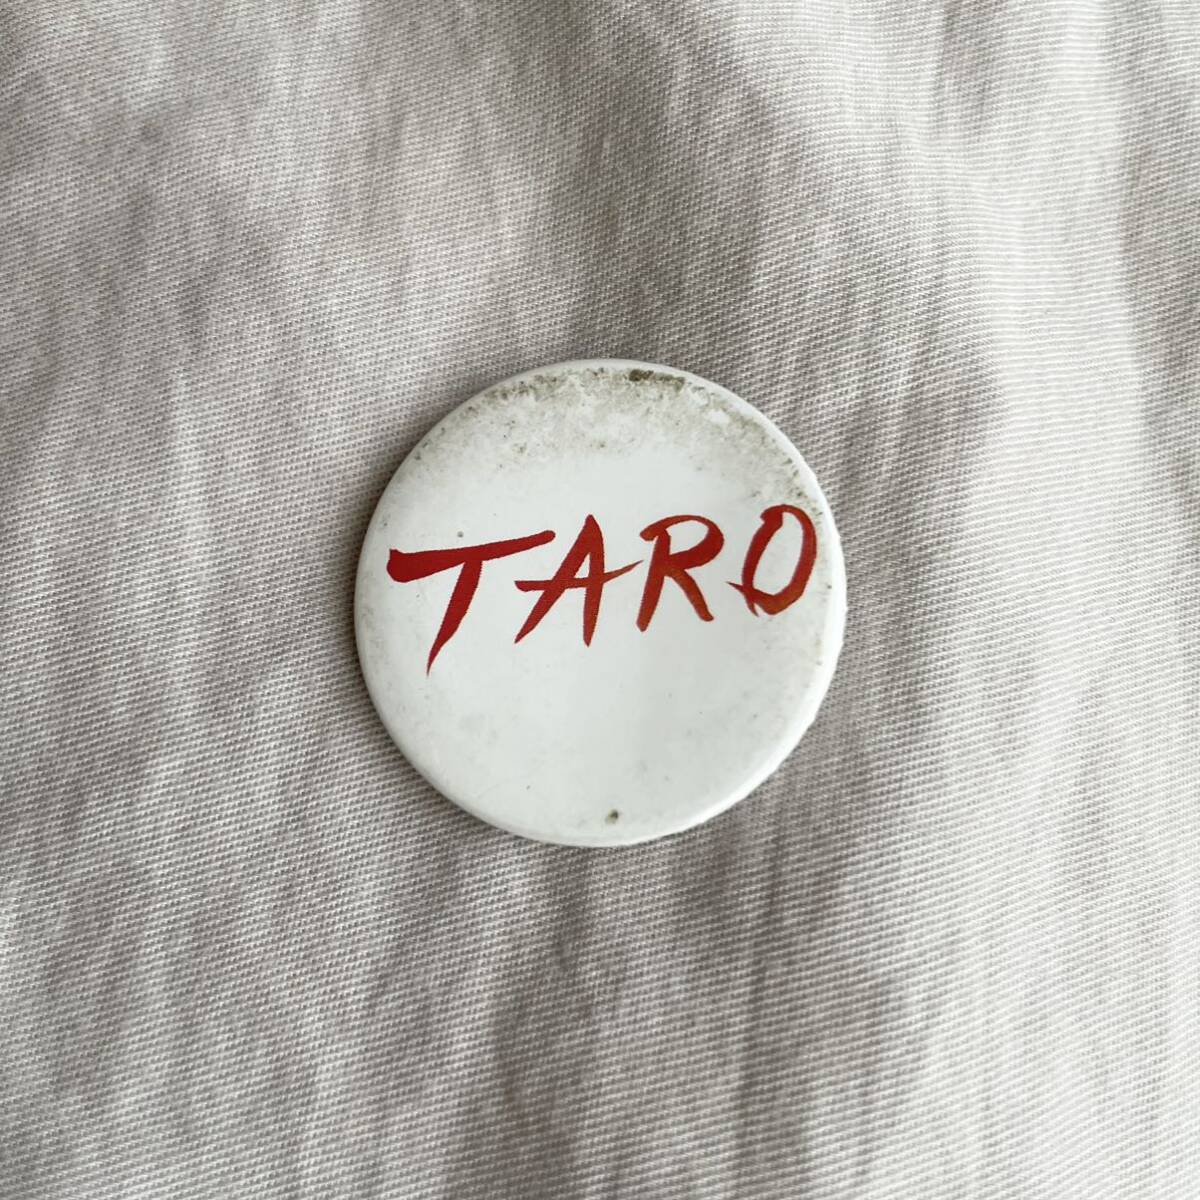 80s~ Vintage Button Badge TARO 岡本太郎 アート ピンバッジ ピンズ 缶バッジ ヴィンテージ ビンテージ 40s 50s 60s 70s 80s_画像1